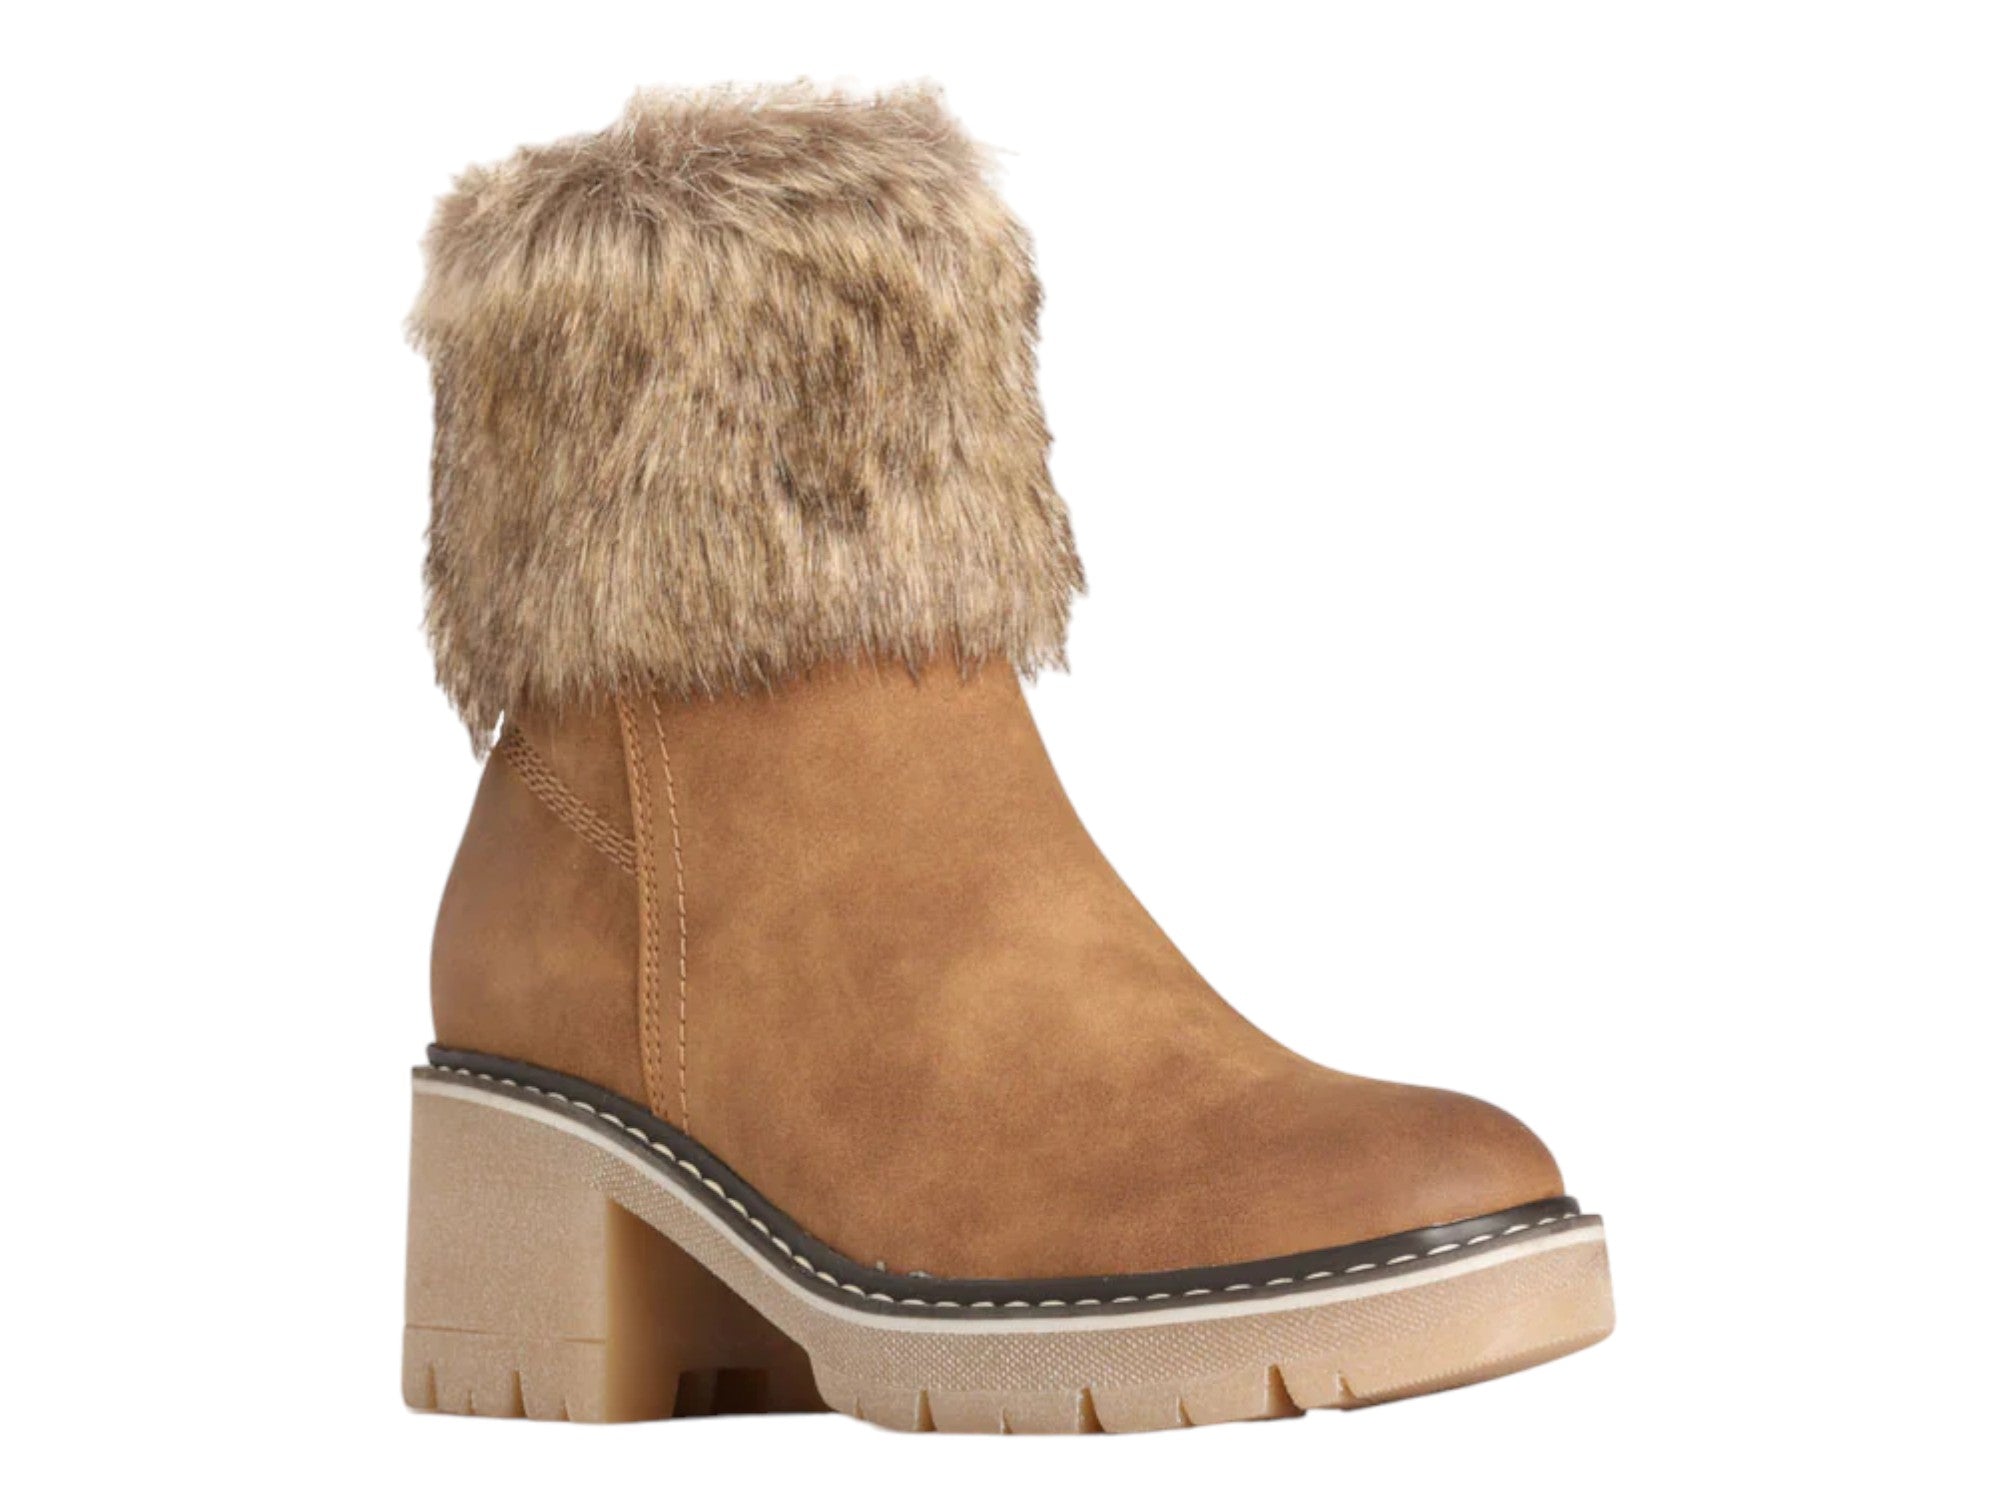 Los Cabos Maddison Faux Ankle Boot - Women's